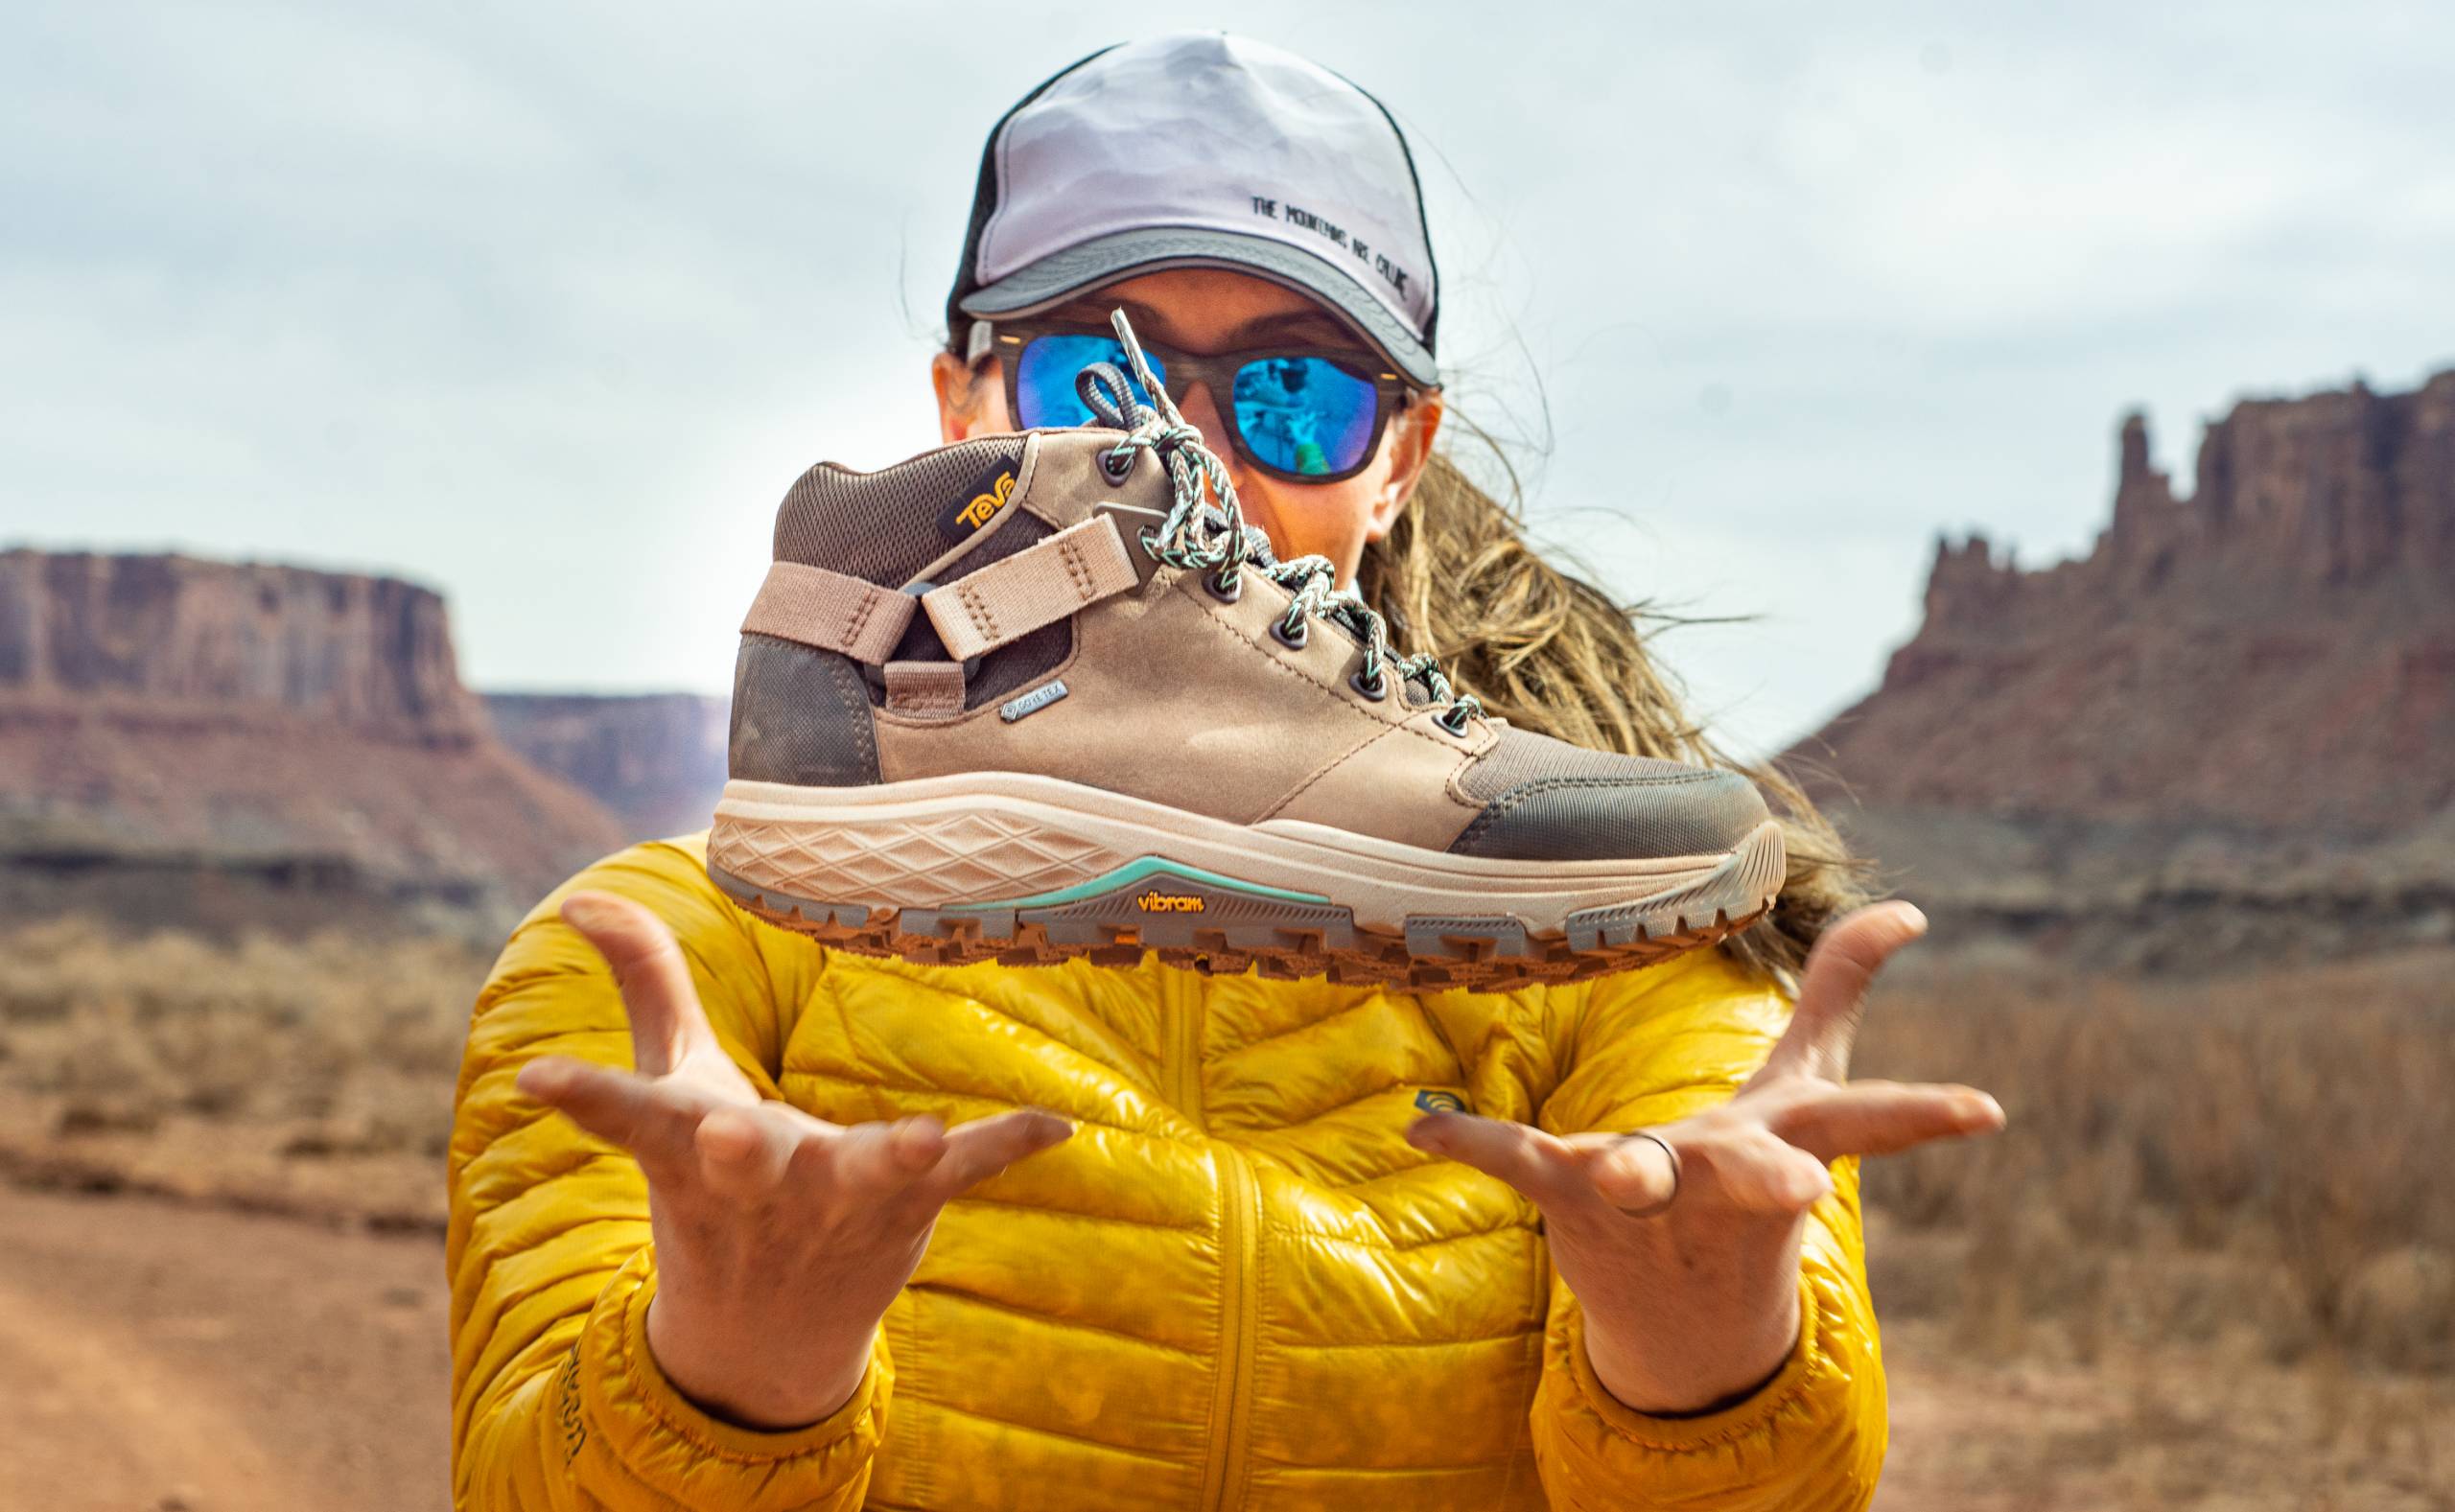 The best hiking boots for women for your next adventure